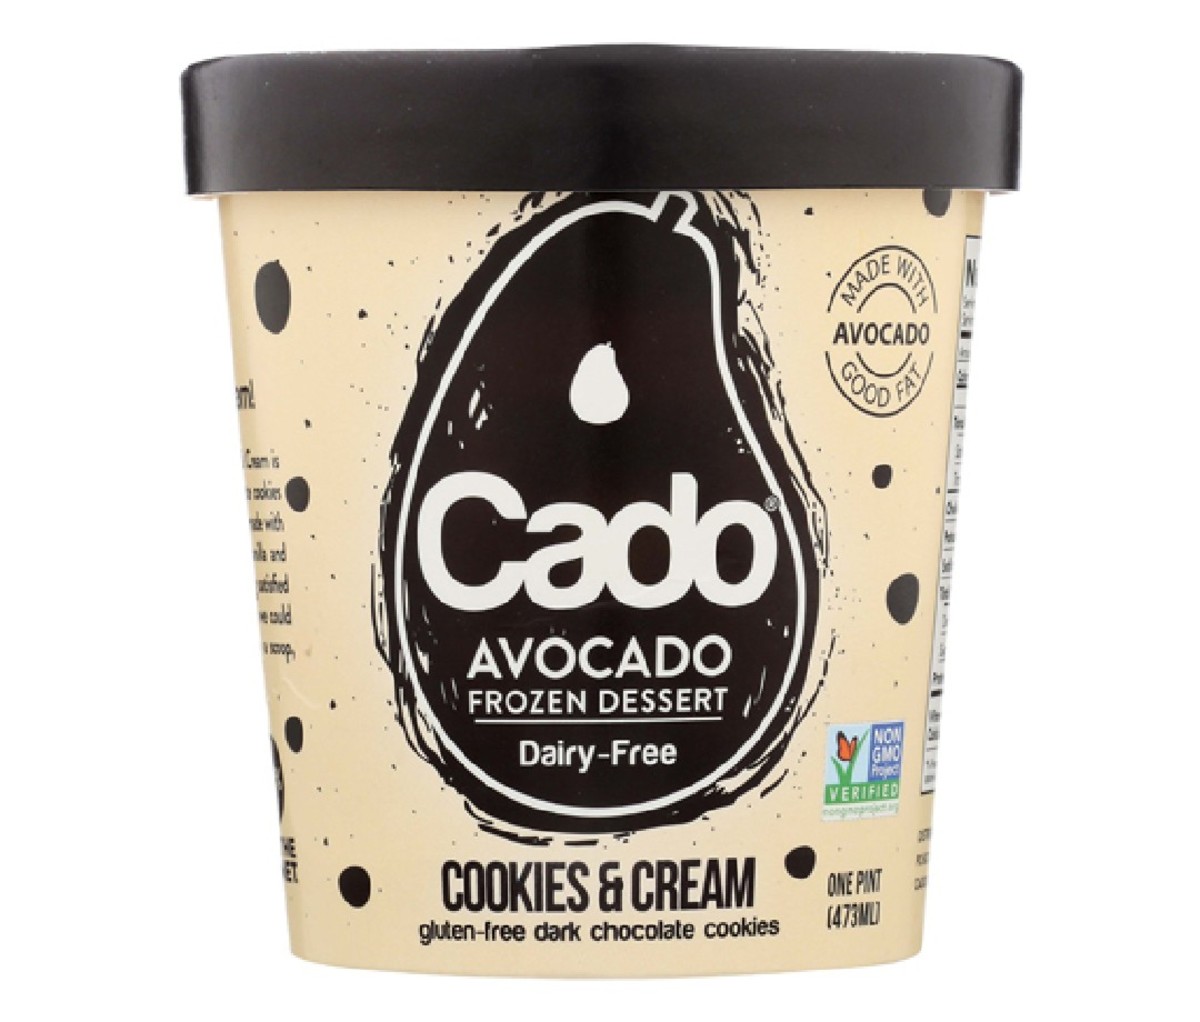 This is the first dairy-free ice cream made from avocado. Aside from that, Cado's ice creams are made with no GMO, artificial flavors, dairy, or soy. They contain 50% less sugar and are made with healthy avocado fat for flavor and creaminess.